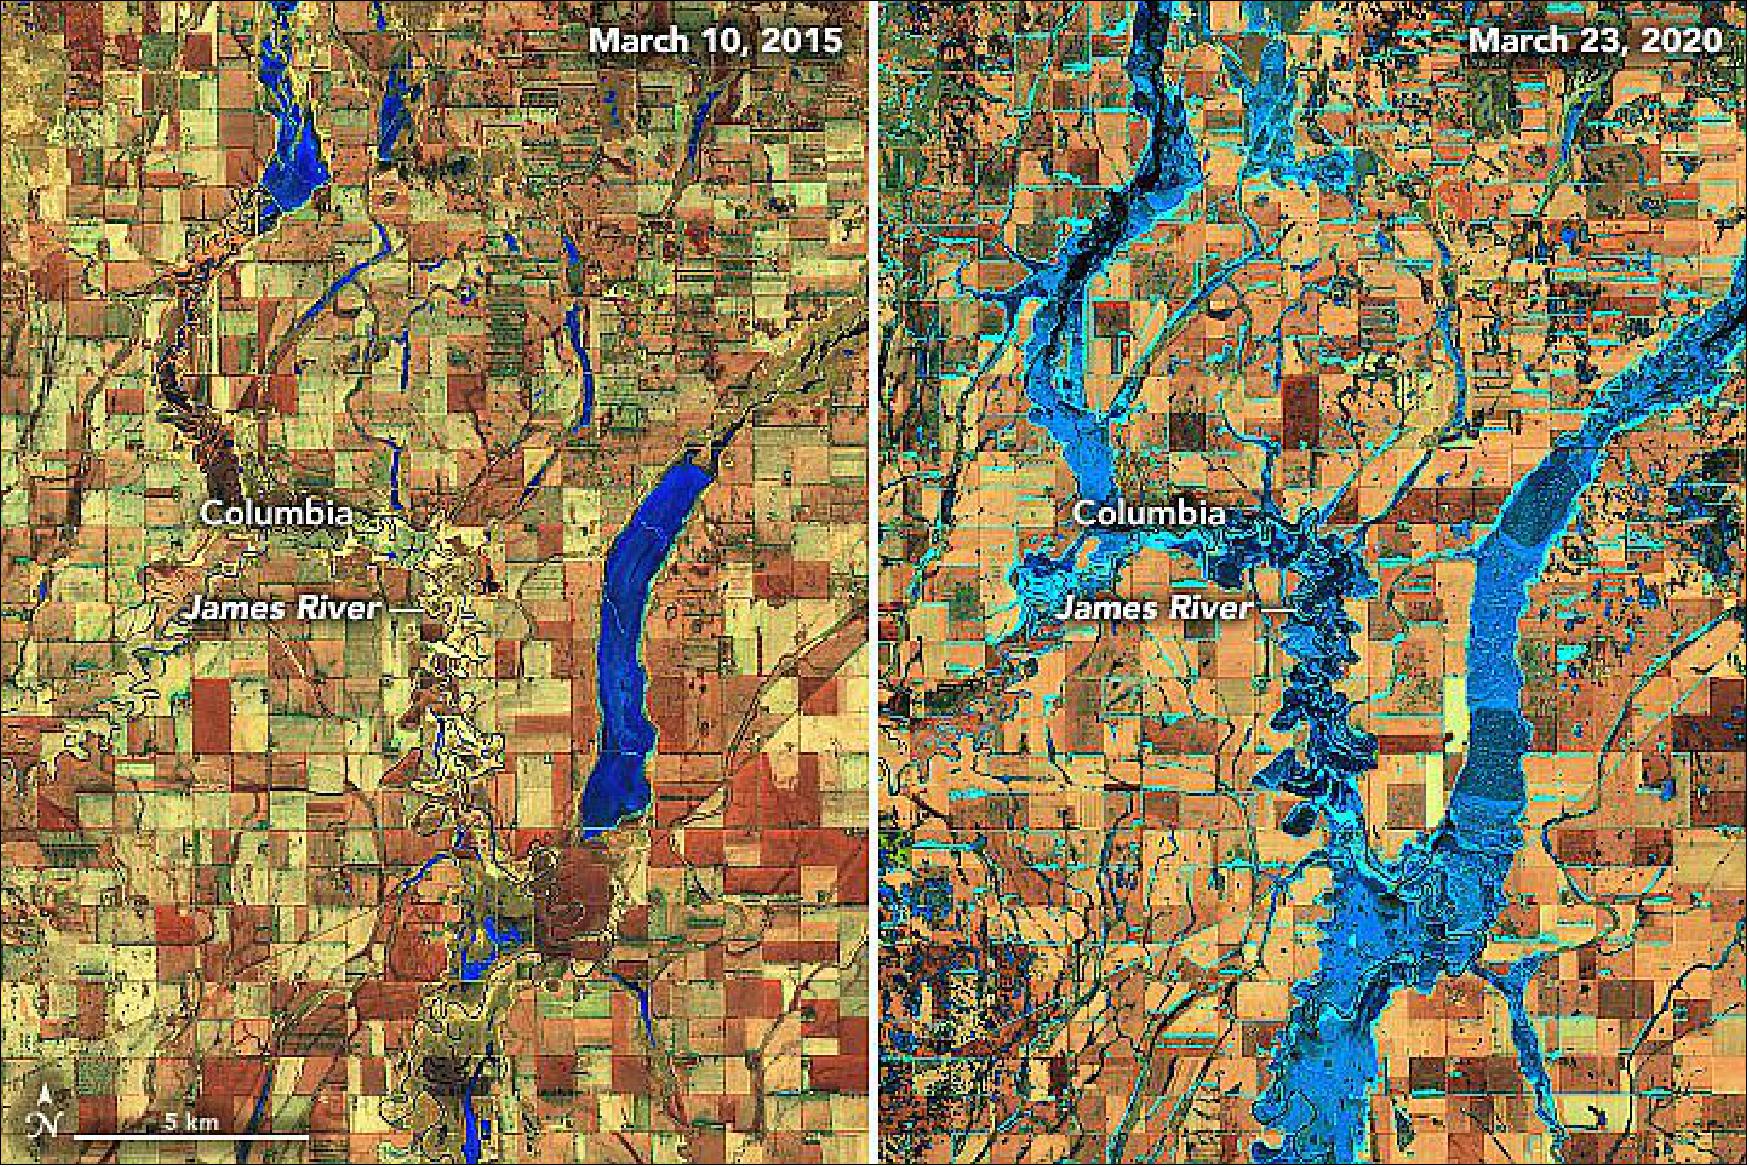 Figure 105: On 23 March 2020, the OLI instrument on Landsat-8 captured an image showing high water levels on the James River, a tributary of the Missouri River in eastern South Dakota. For comparison, the second Landsat image (left) shows the same area during a more typical spring in March 2015. In this false-color view (bands 6-5-4), ice appears light blue. Open water is dark blue (image credit: NASA Earth Observatory images by Joshua Stevens, using Landsat data from the U.S. Geological Survey, Story by Adam Voiland)